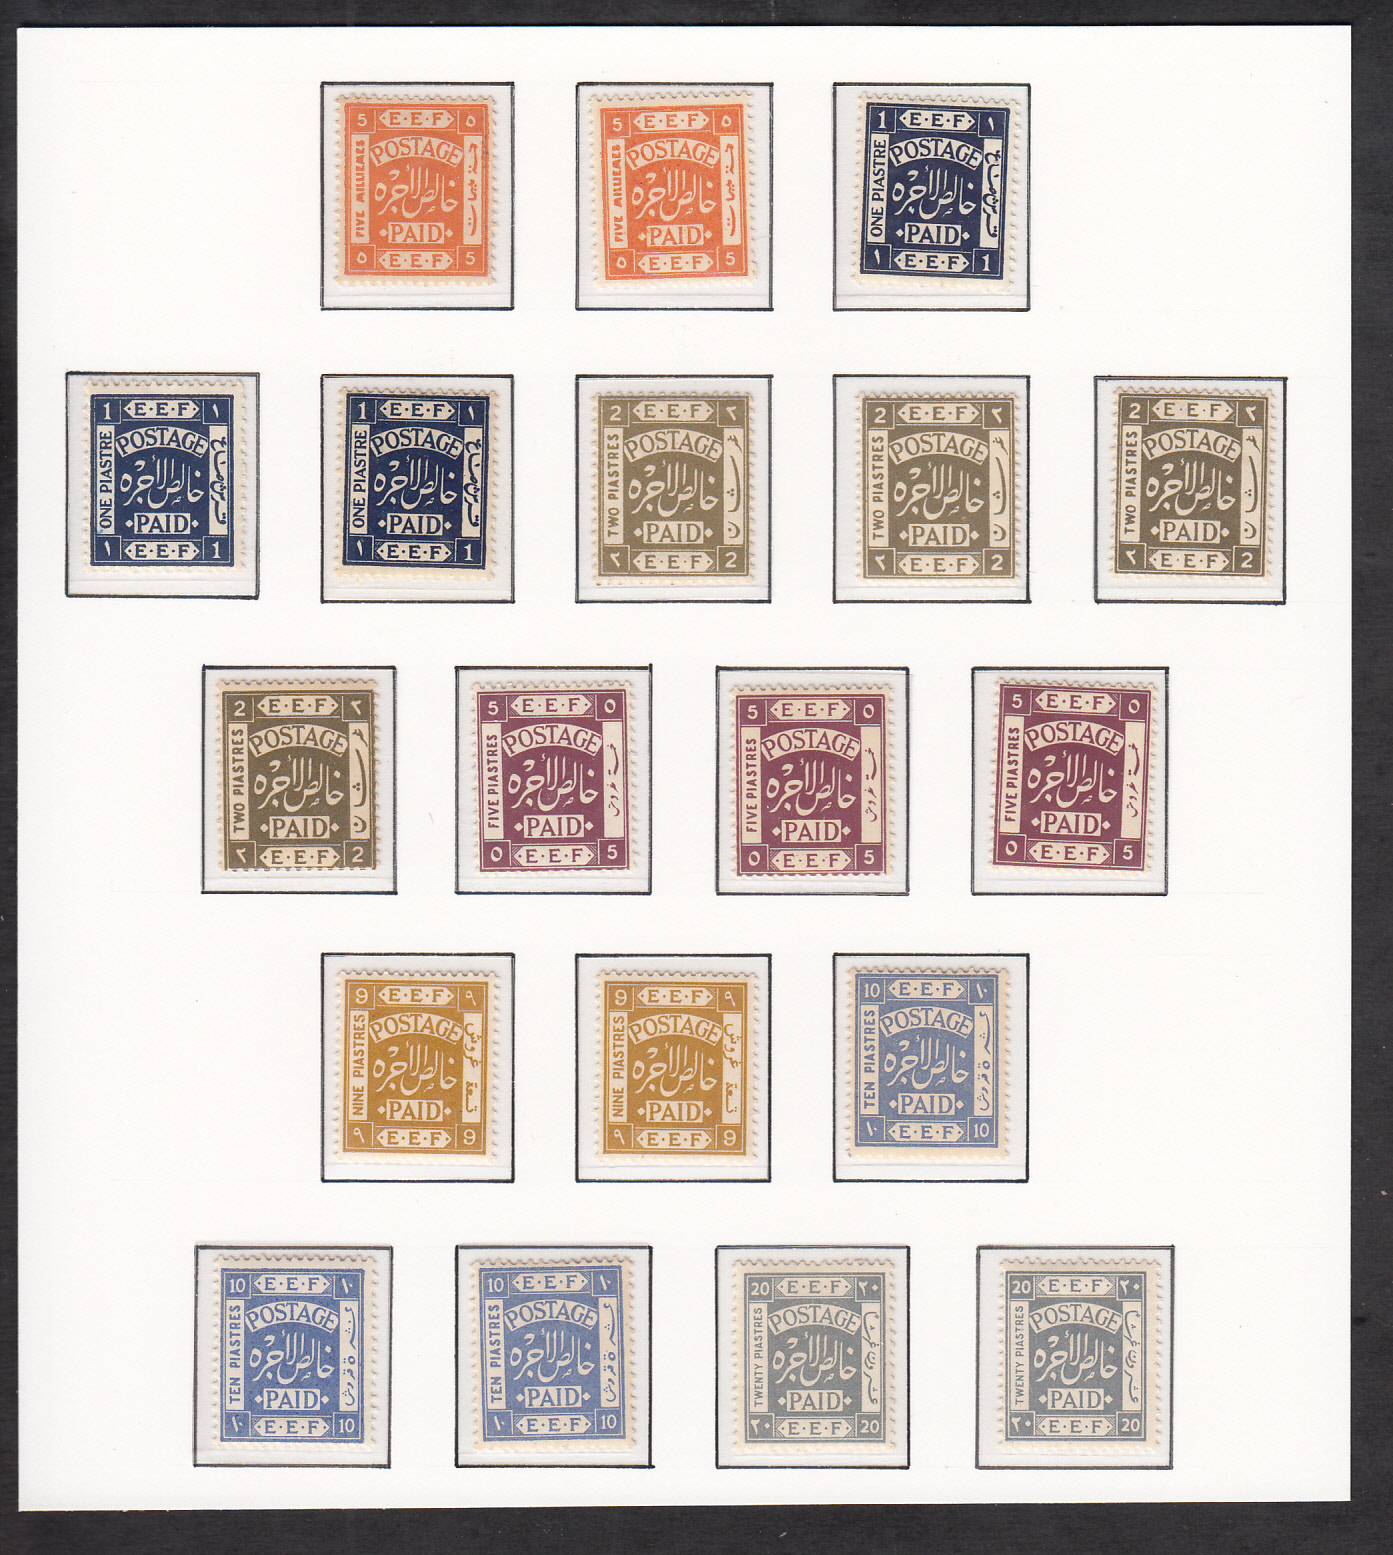 Lot 36 - Palestine stamps  E.E.F. & Mandate Stamps  -  Doron Waide Mail Auction #40